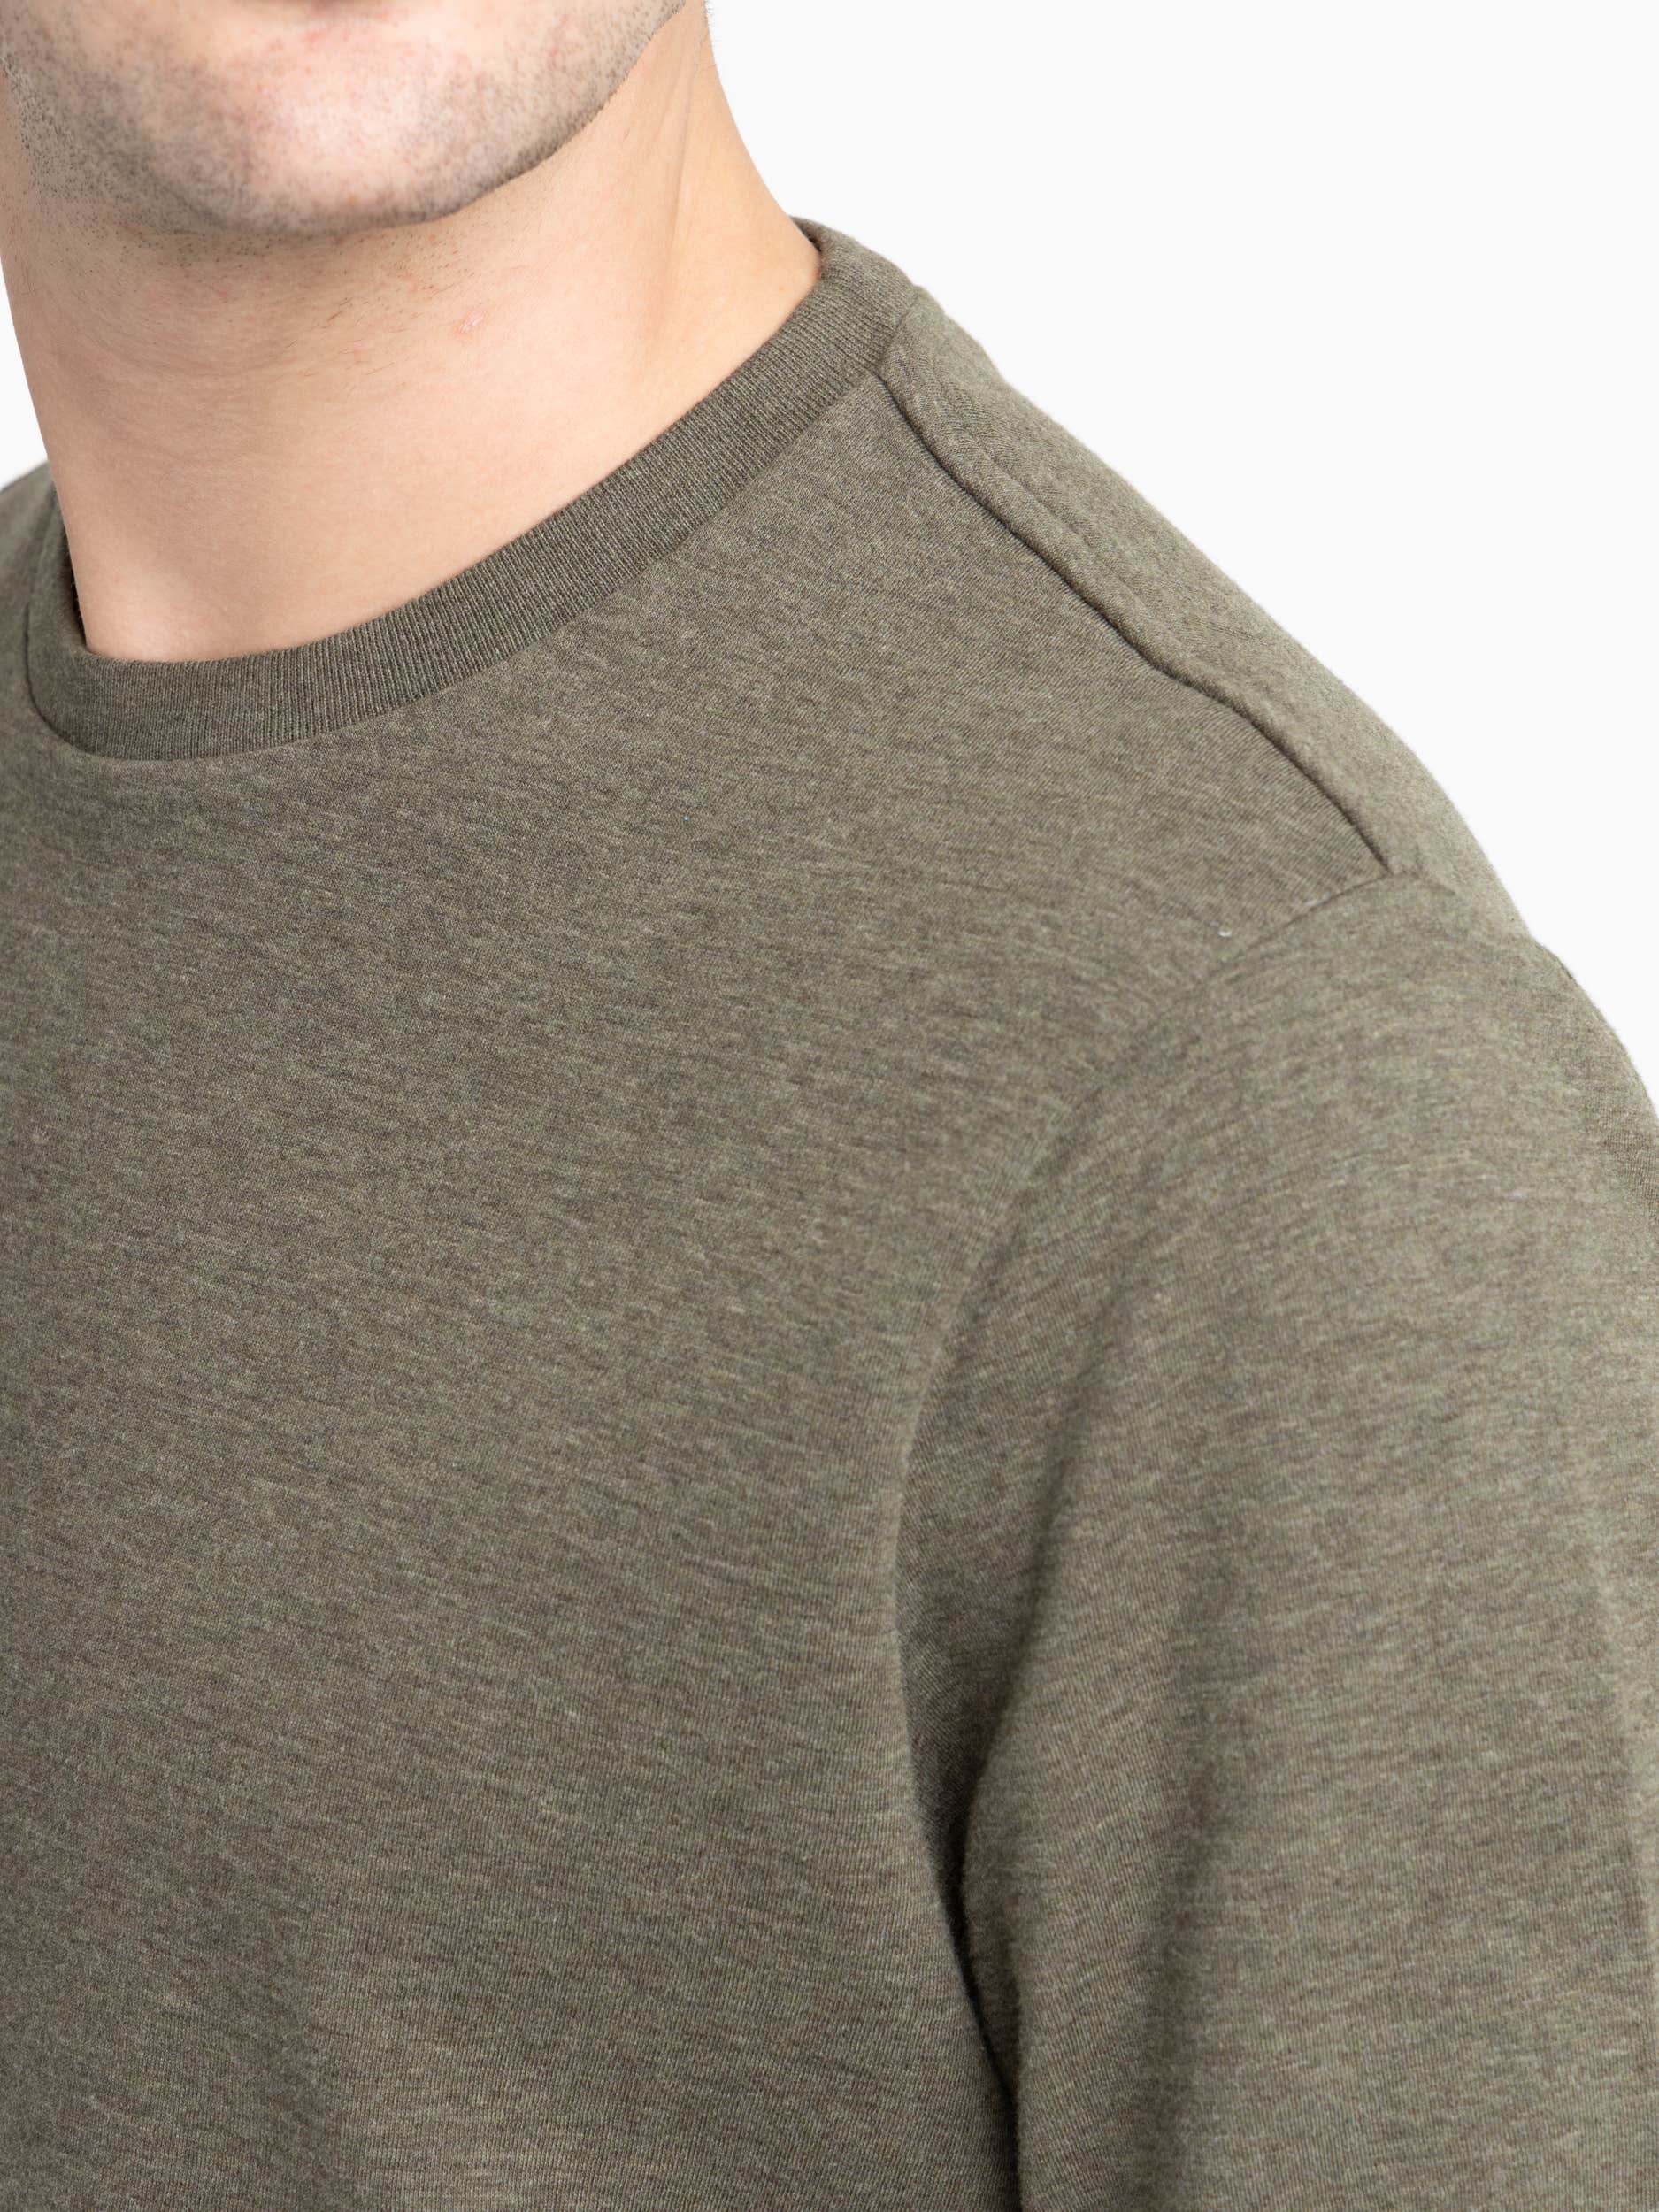 Olive Green Duo Fold Long Sleeve Crew